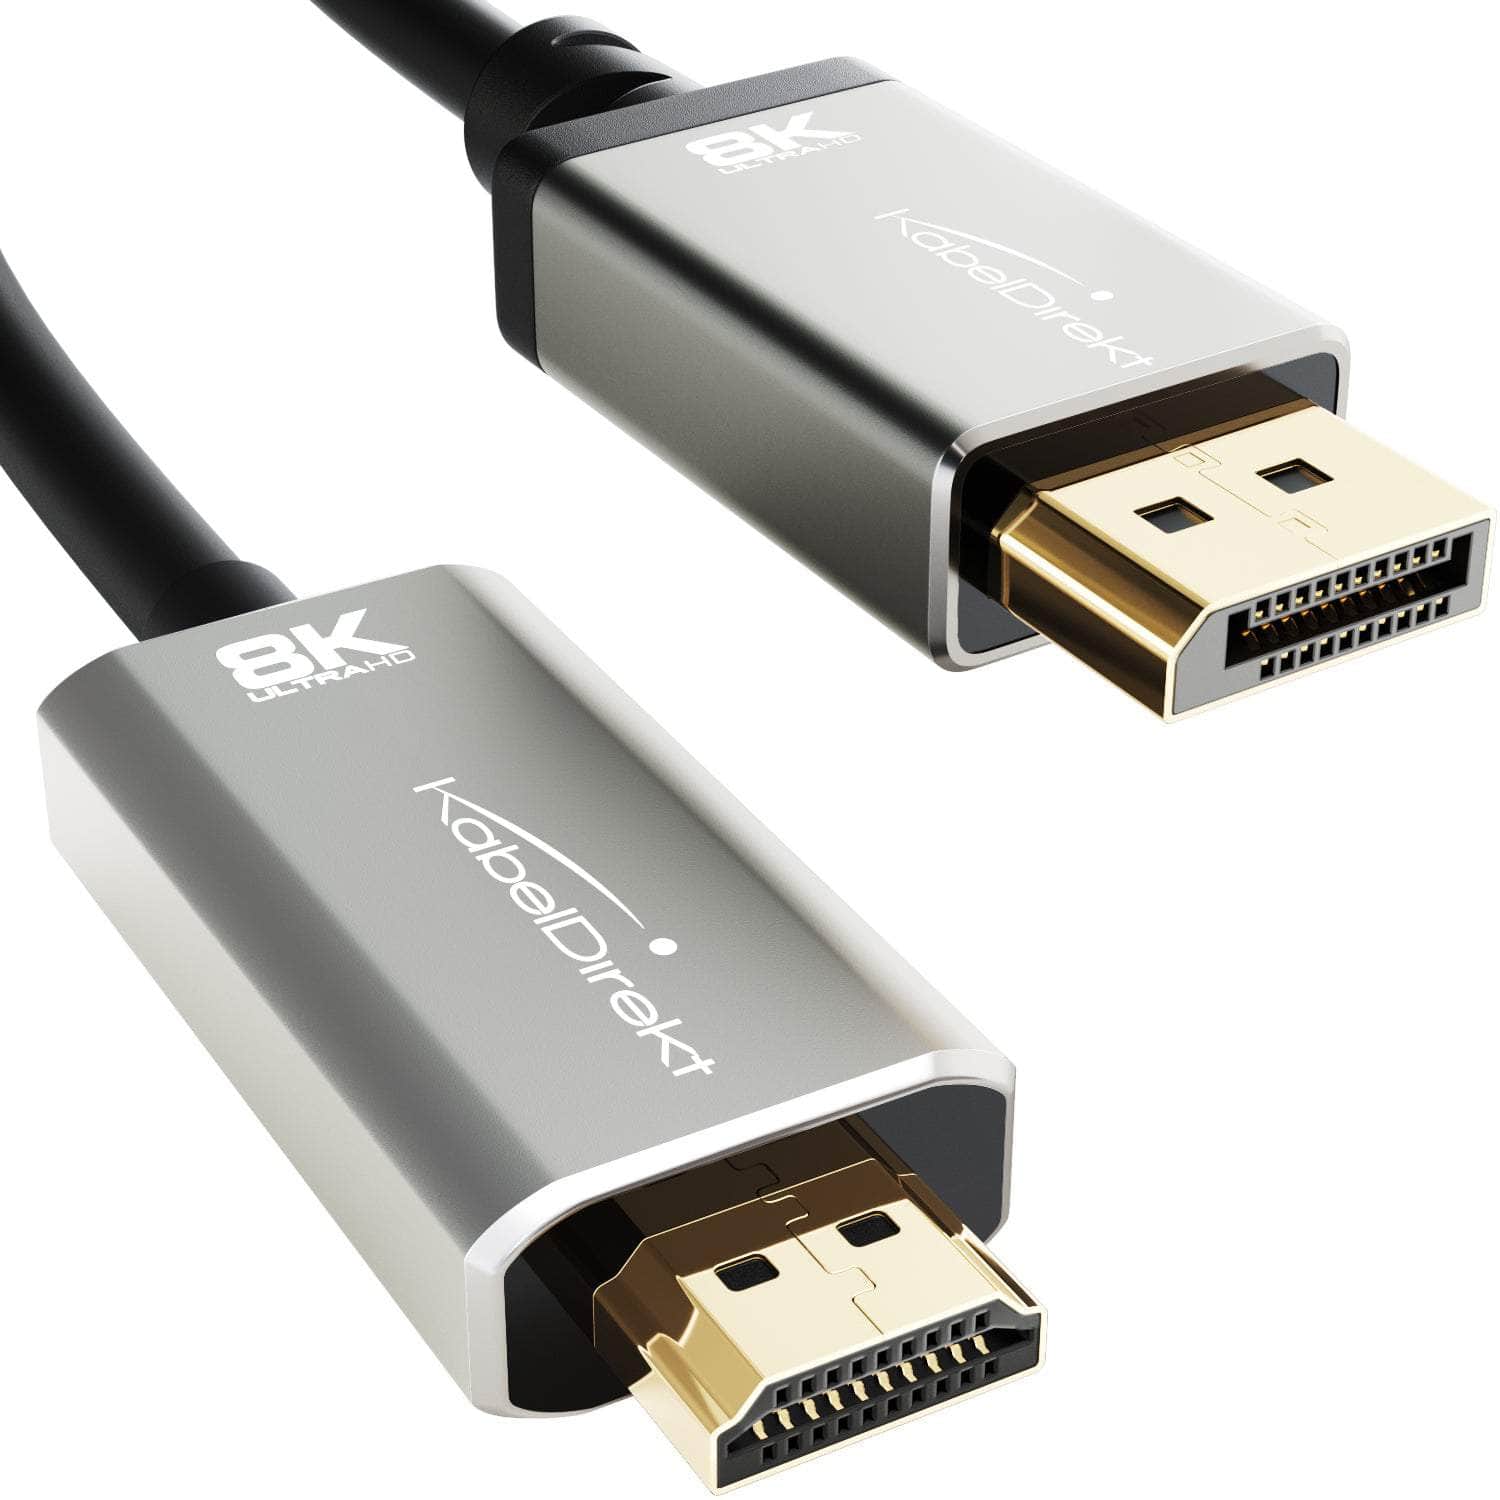 DisplayPort to HDMI adapter cable, 1.8m